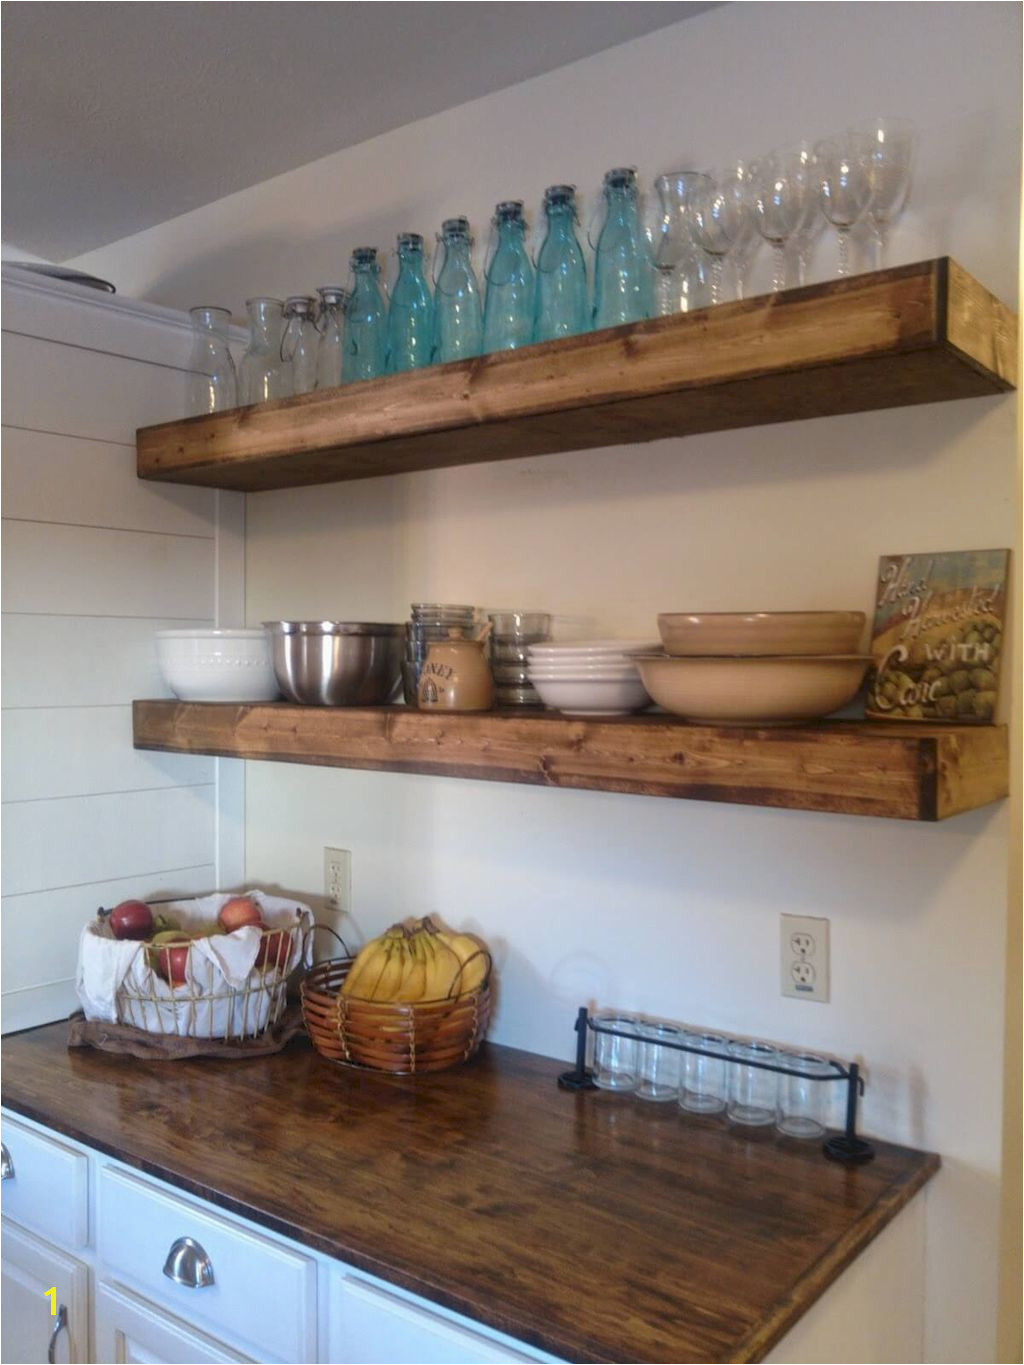 Mural Floating Shelf 60 Stunning Rustic Kitchen Decorating Ideas and Remodel